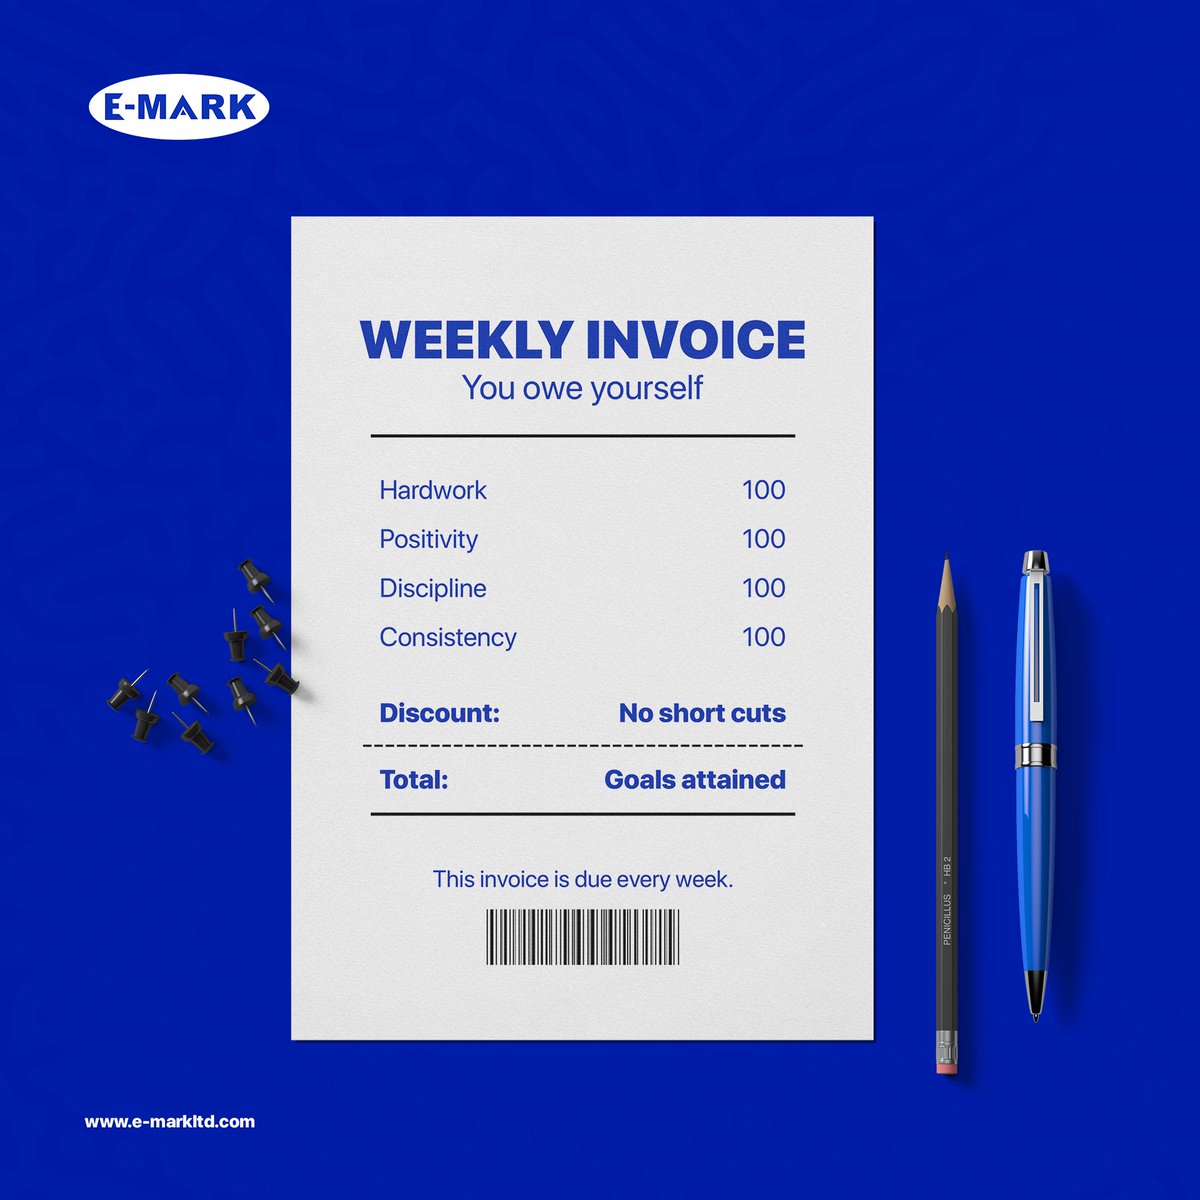 Here is your invoice for your weekly goals. There is absolutely no discounts to putting in the work. Let’s get it! #HappyWeek #GoalsOnGoals #ConnectingPeople